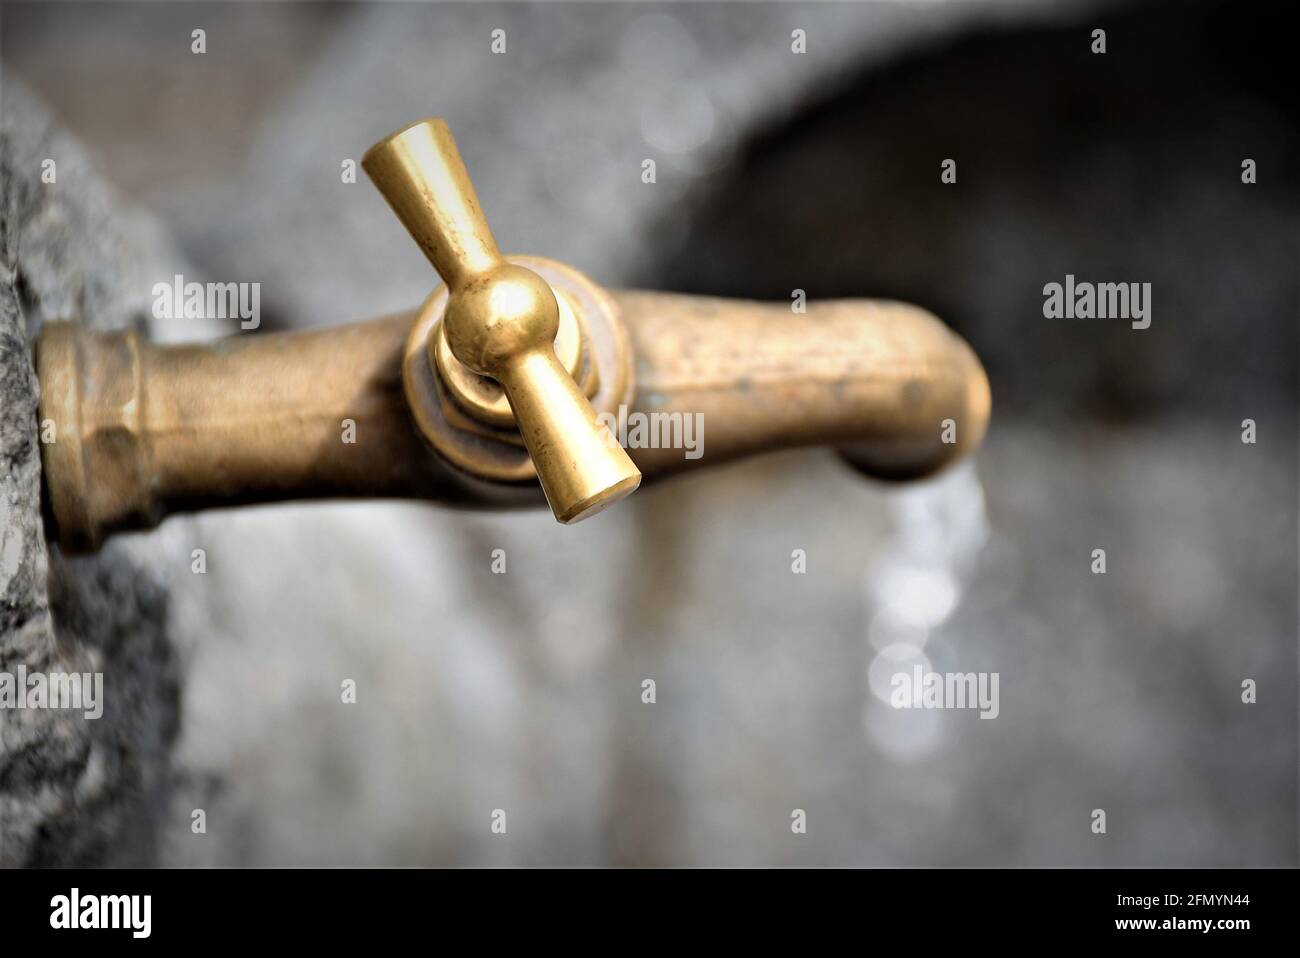 Top view of an old water tap. The brass faucet is shining brightly in the sun. Running water looks fresh. The drops have a nice bokey. Vintage. Rustic. Stock Photo